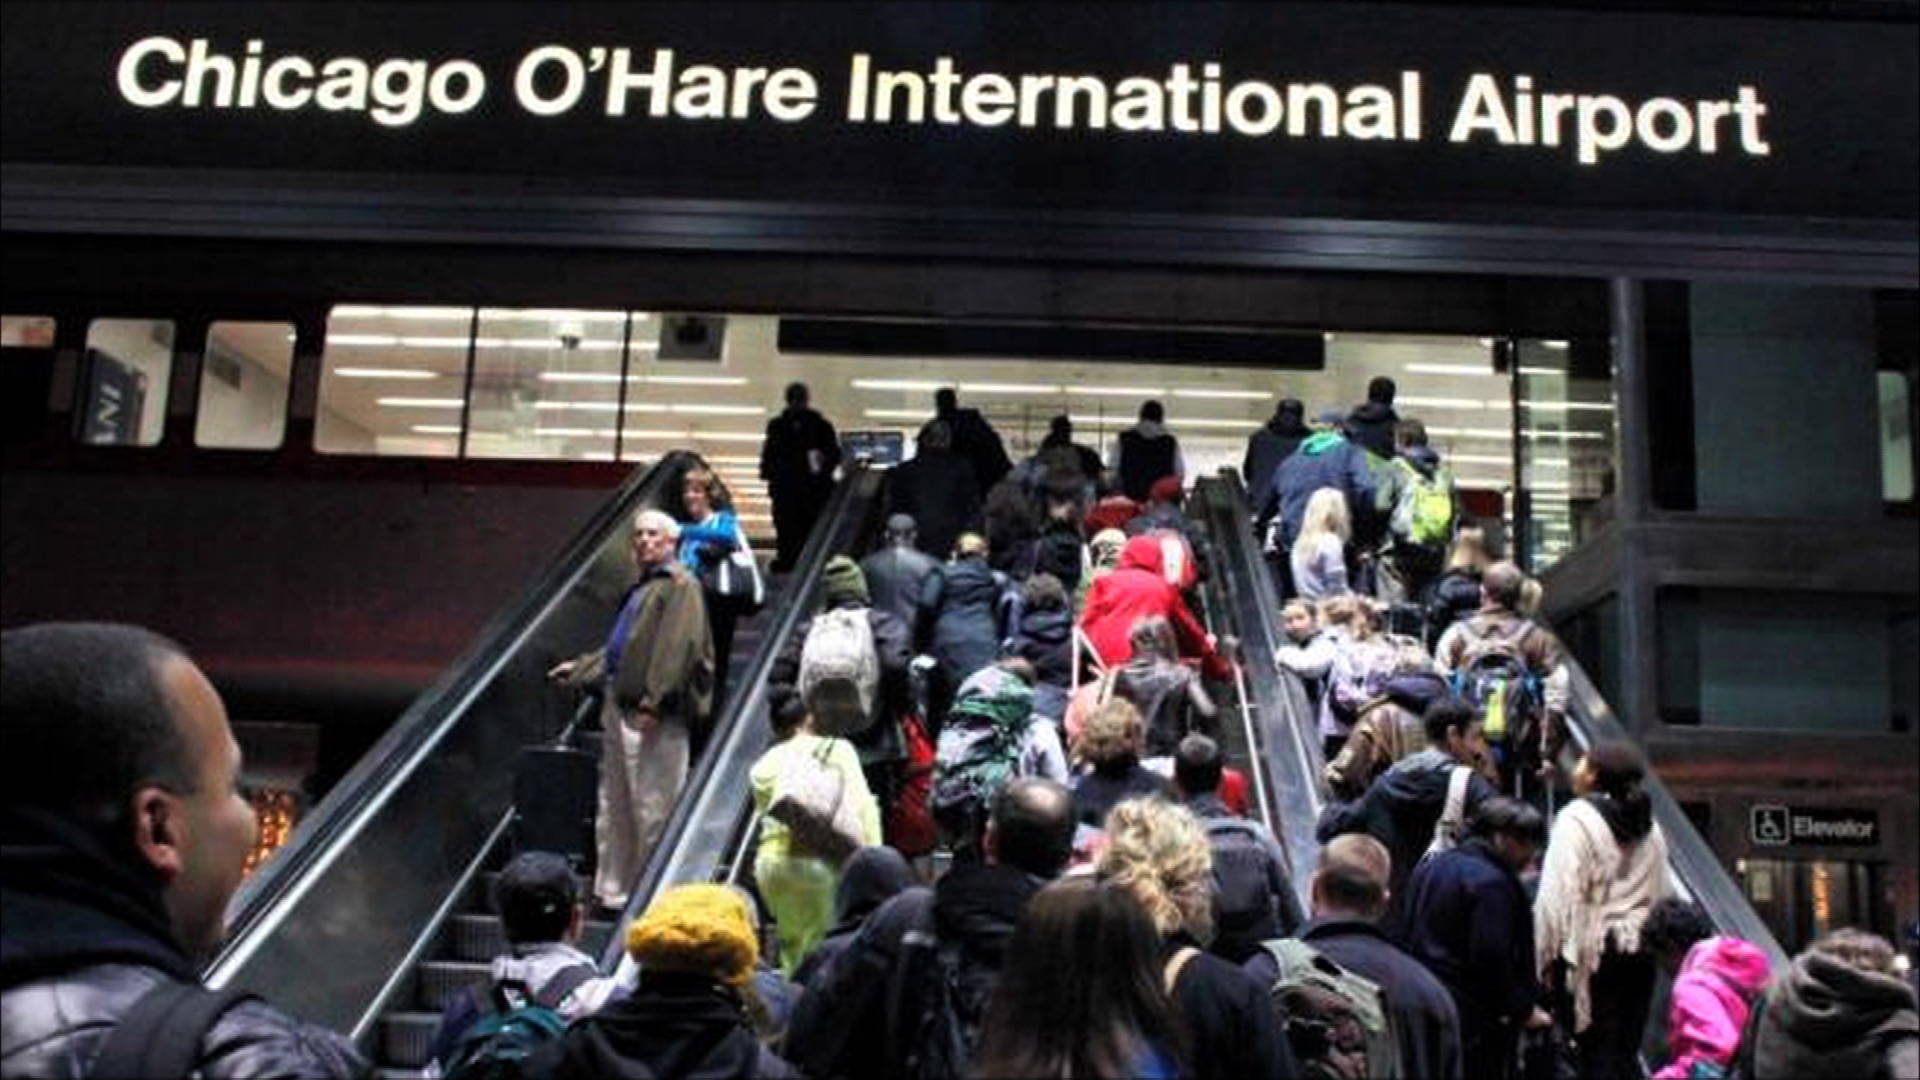 Workers Plan Airport Strike At Chicago S O Hare On November 29 Democracy Now